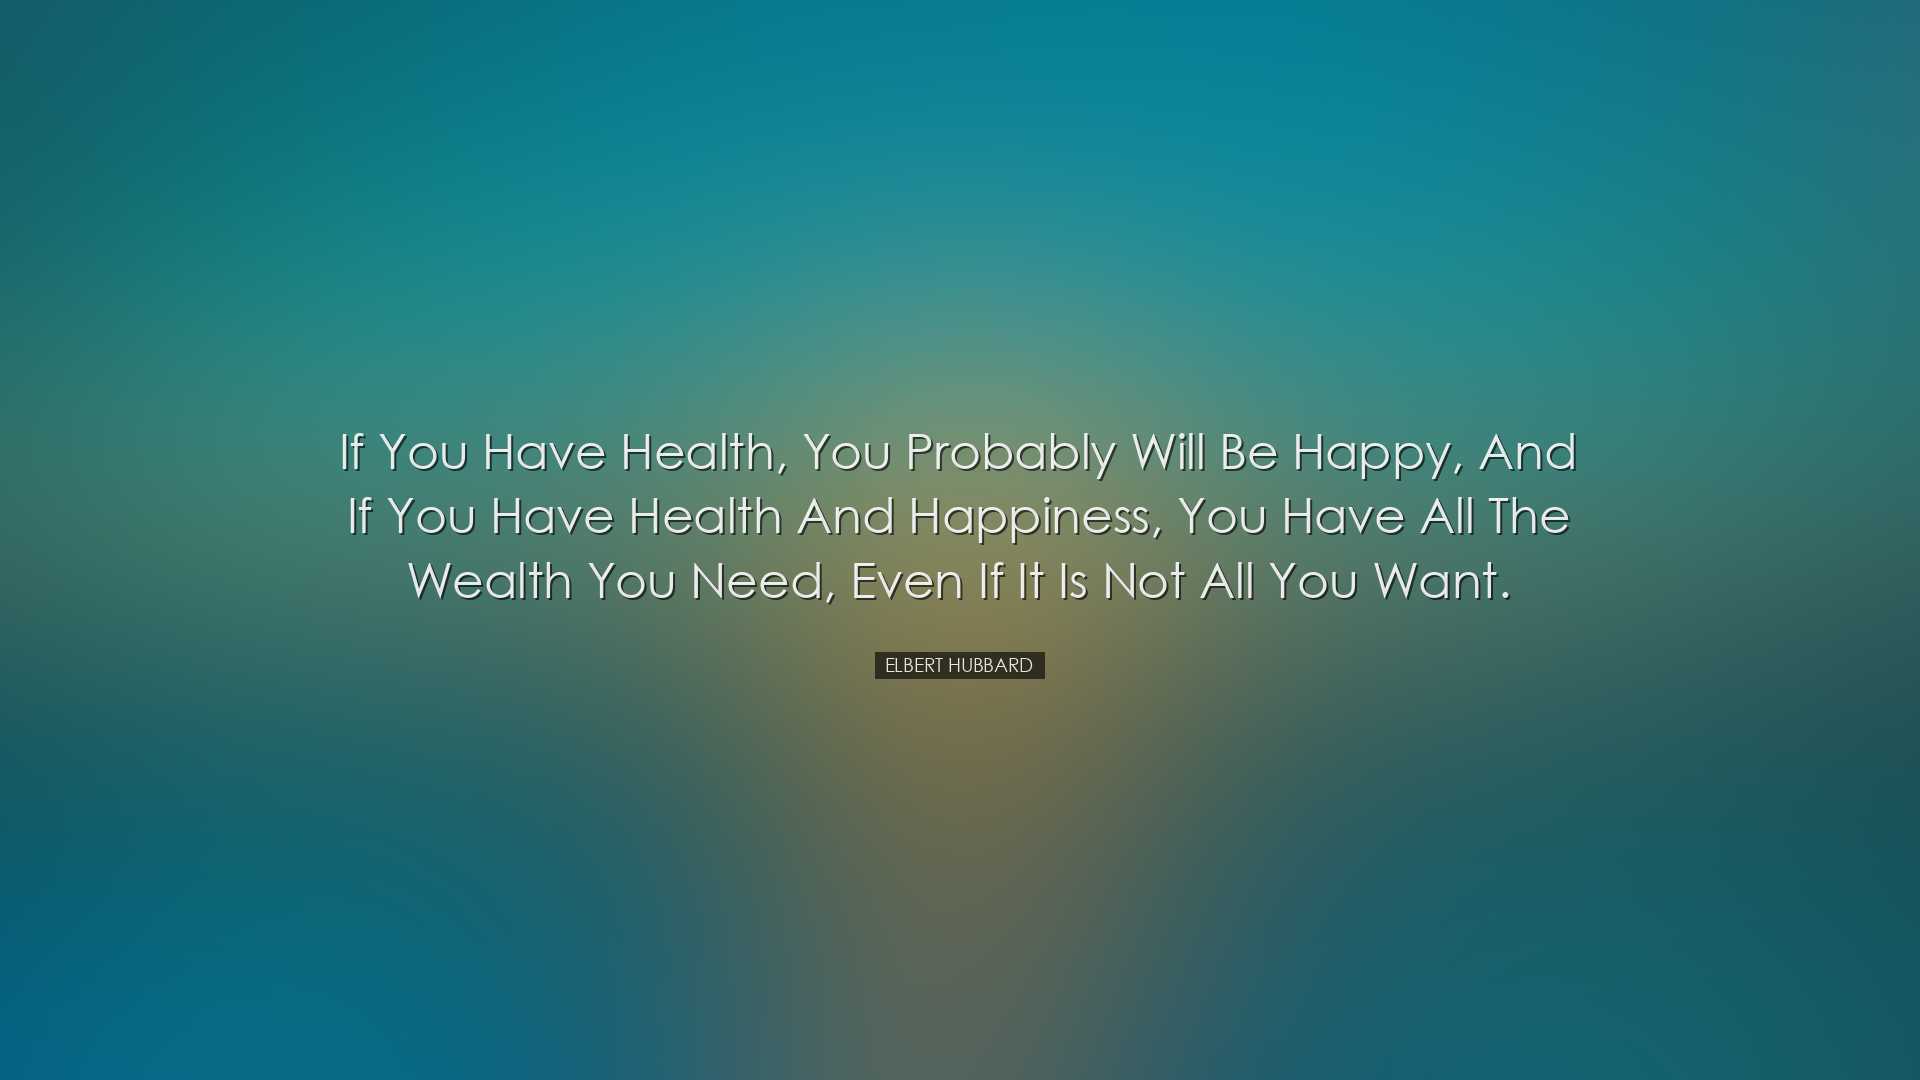 If you have health, you probably will be happy, and if you have he